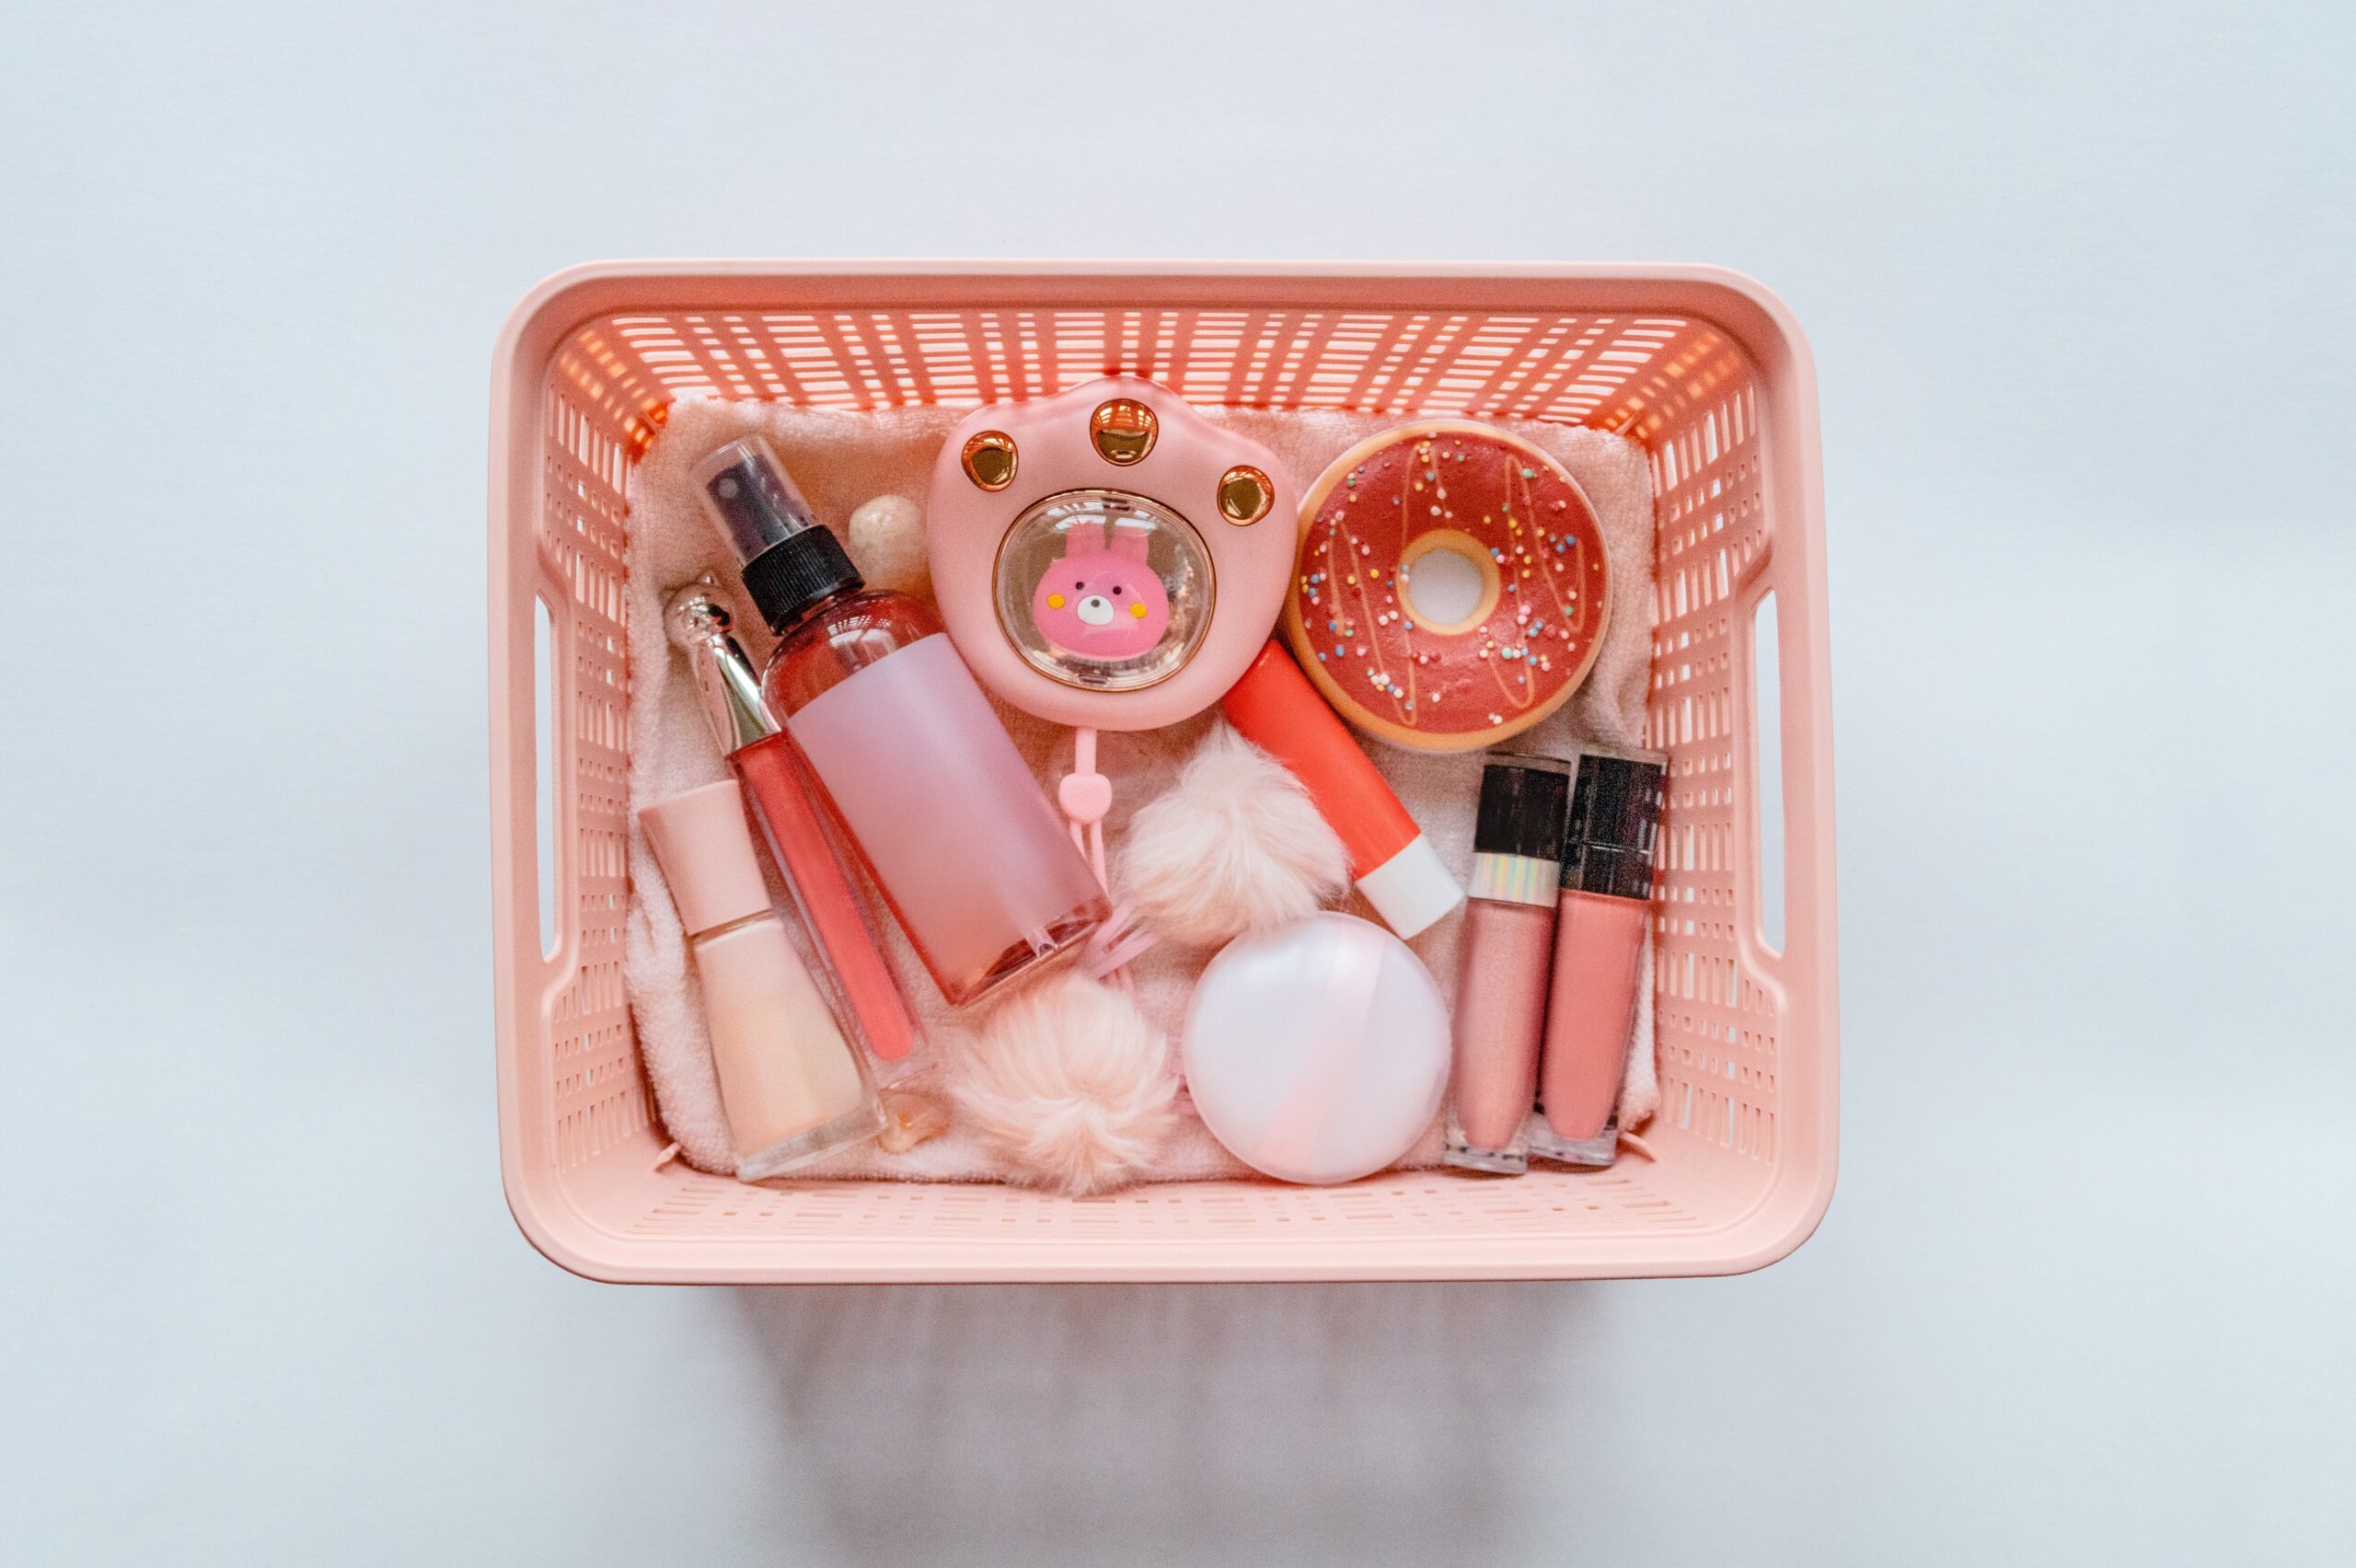 collection-of-cosmetic-products-in-a-pink-storage-bin